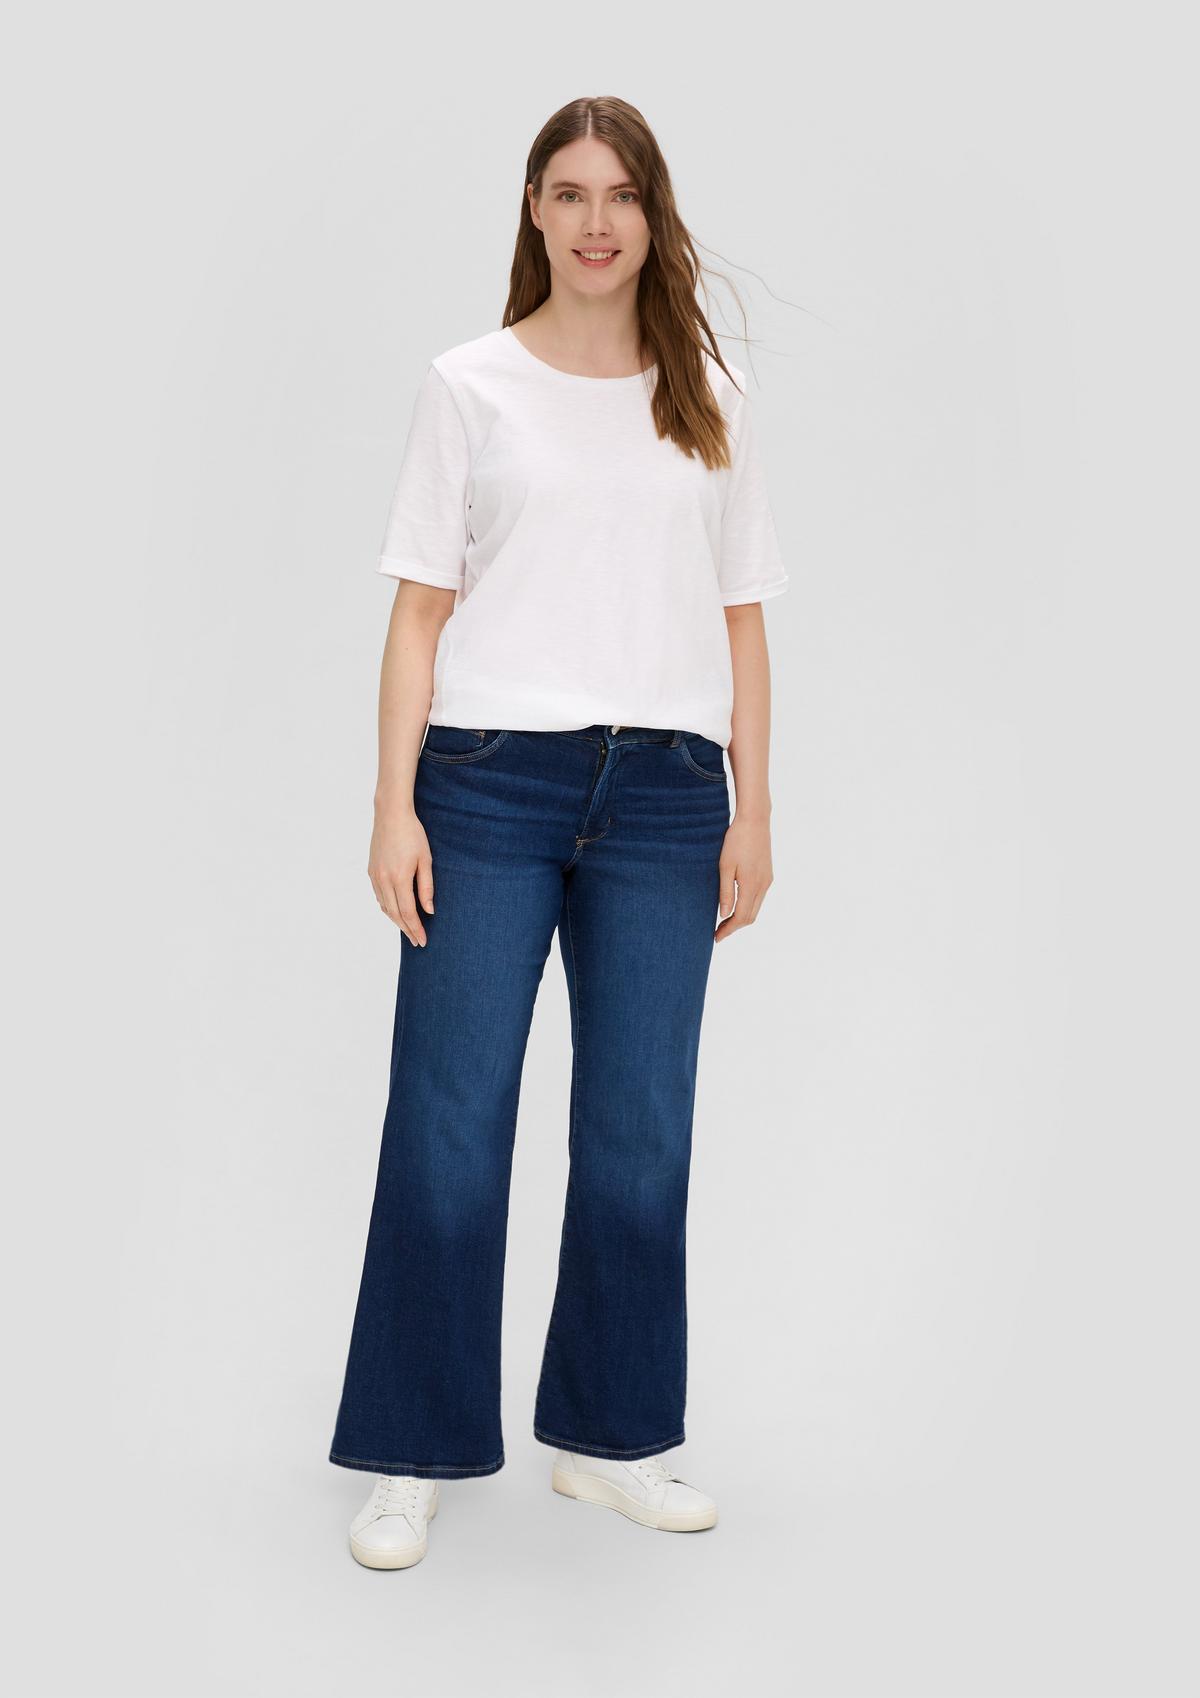 s.Oliver Jeans / mid rise / flared leg